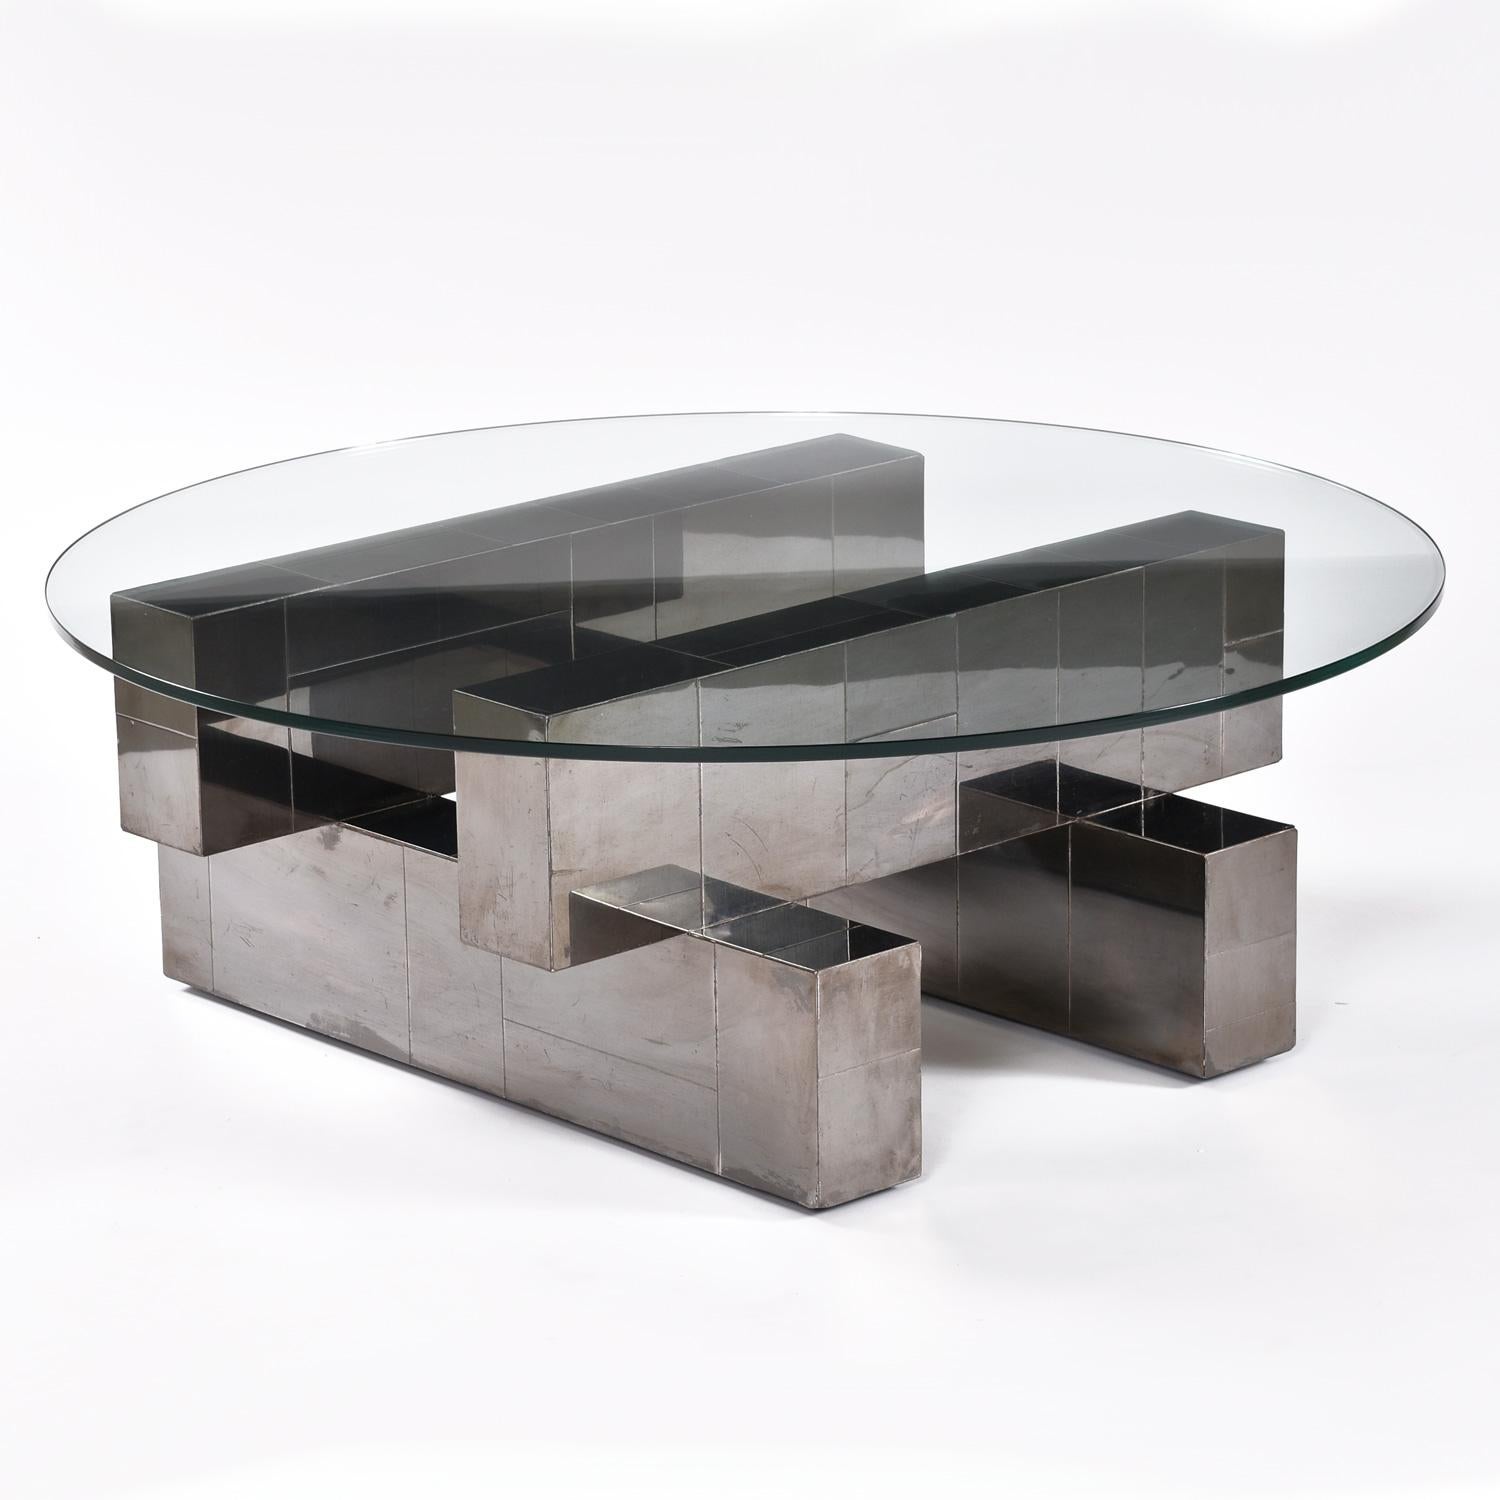 American Geometric Chromed Steel Cityscape Coffee Table with Round Glass by Paul Evans